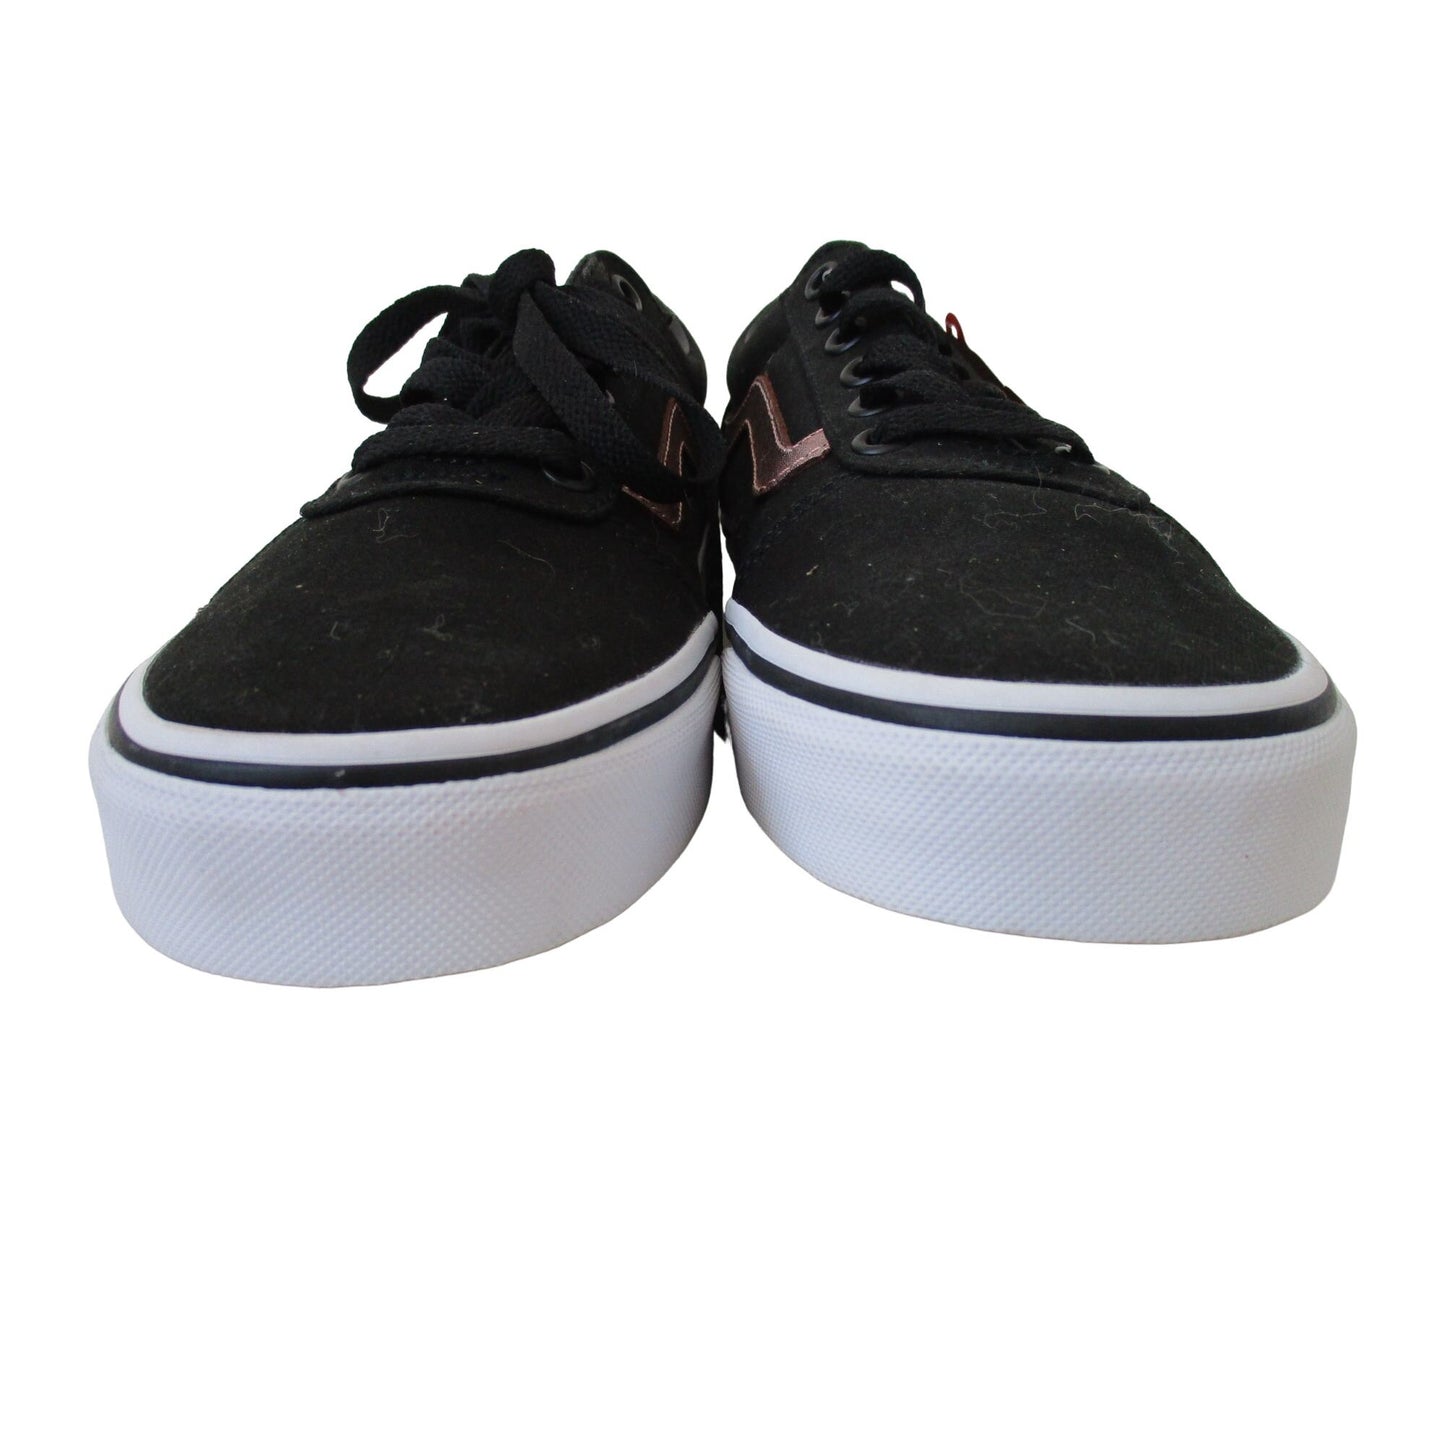 Brand NEW & Eye-catching! Vans Black Canvas with Rose Gold Pink Leather Flame